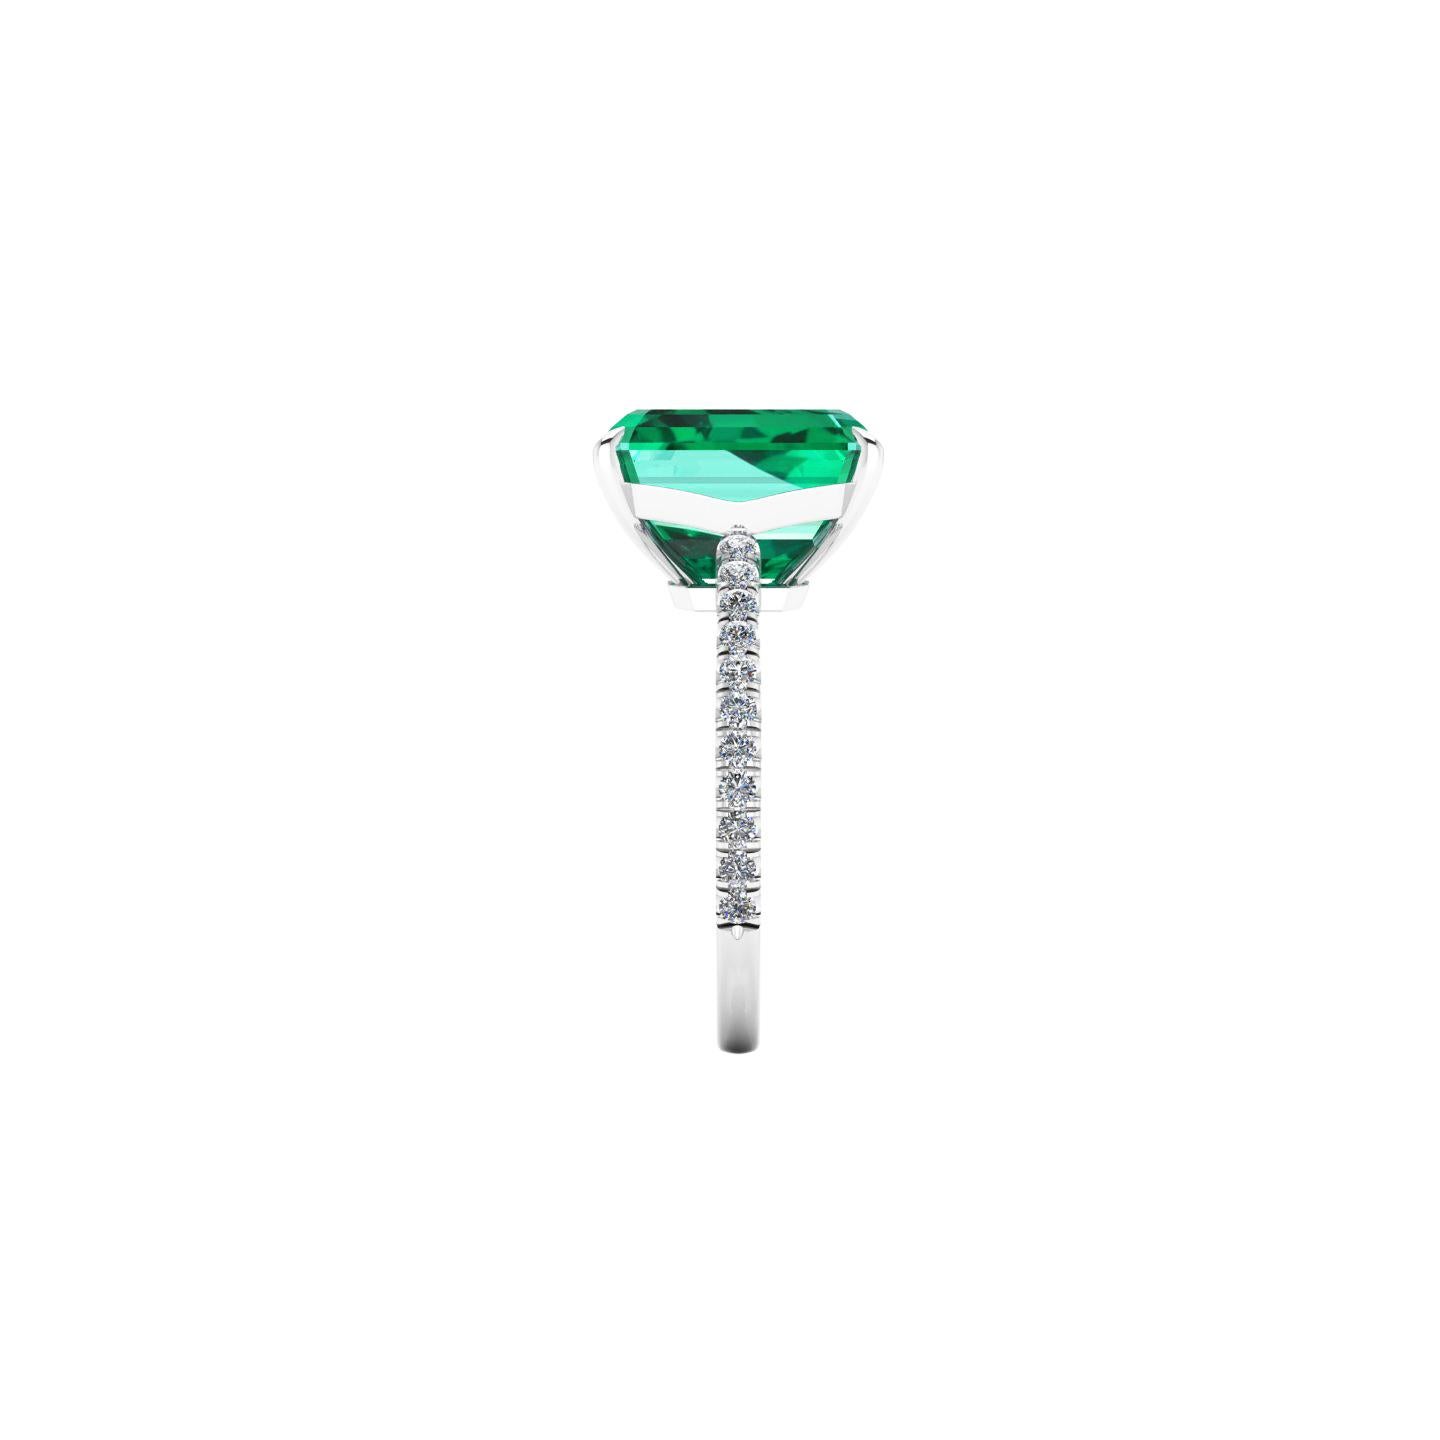 GIA Certified 4.53 carat Emerald, very high quality color,  embellished by a pave' of bright diamonds of approximately  total carat weight of 0.32 carat, set in a hand crafted Platinum 950 ring, manufactured with the best Italian